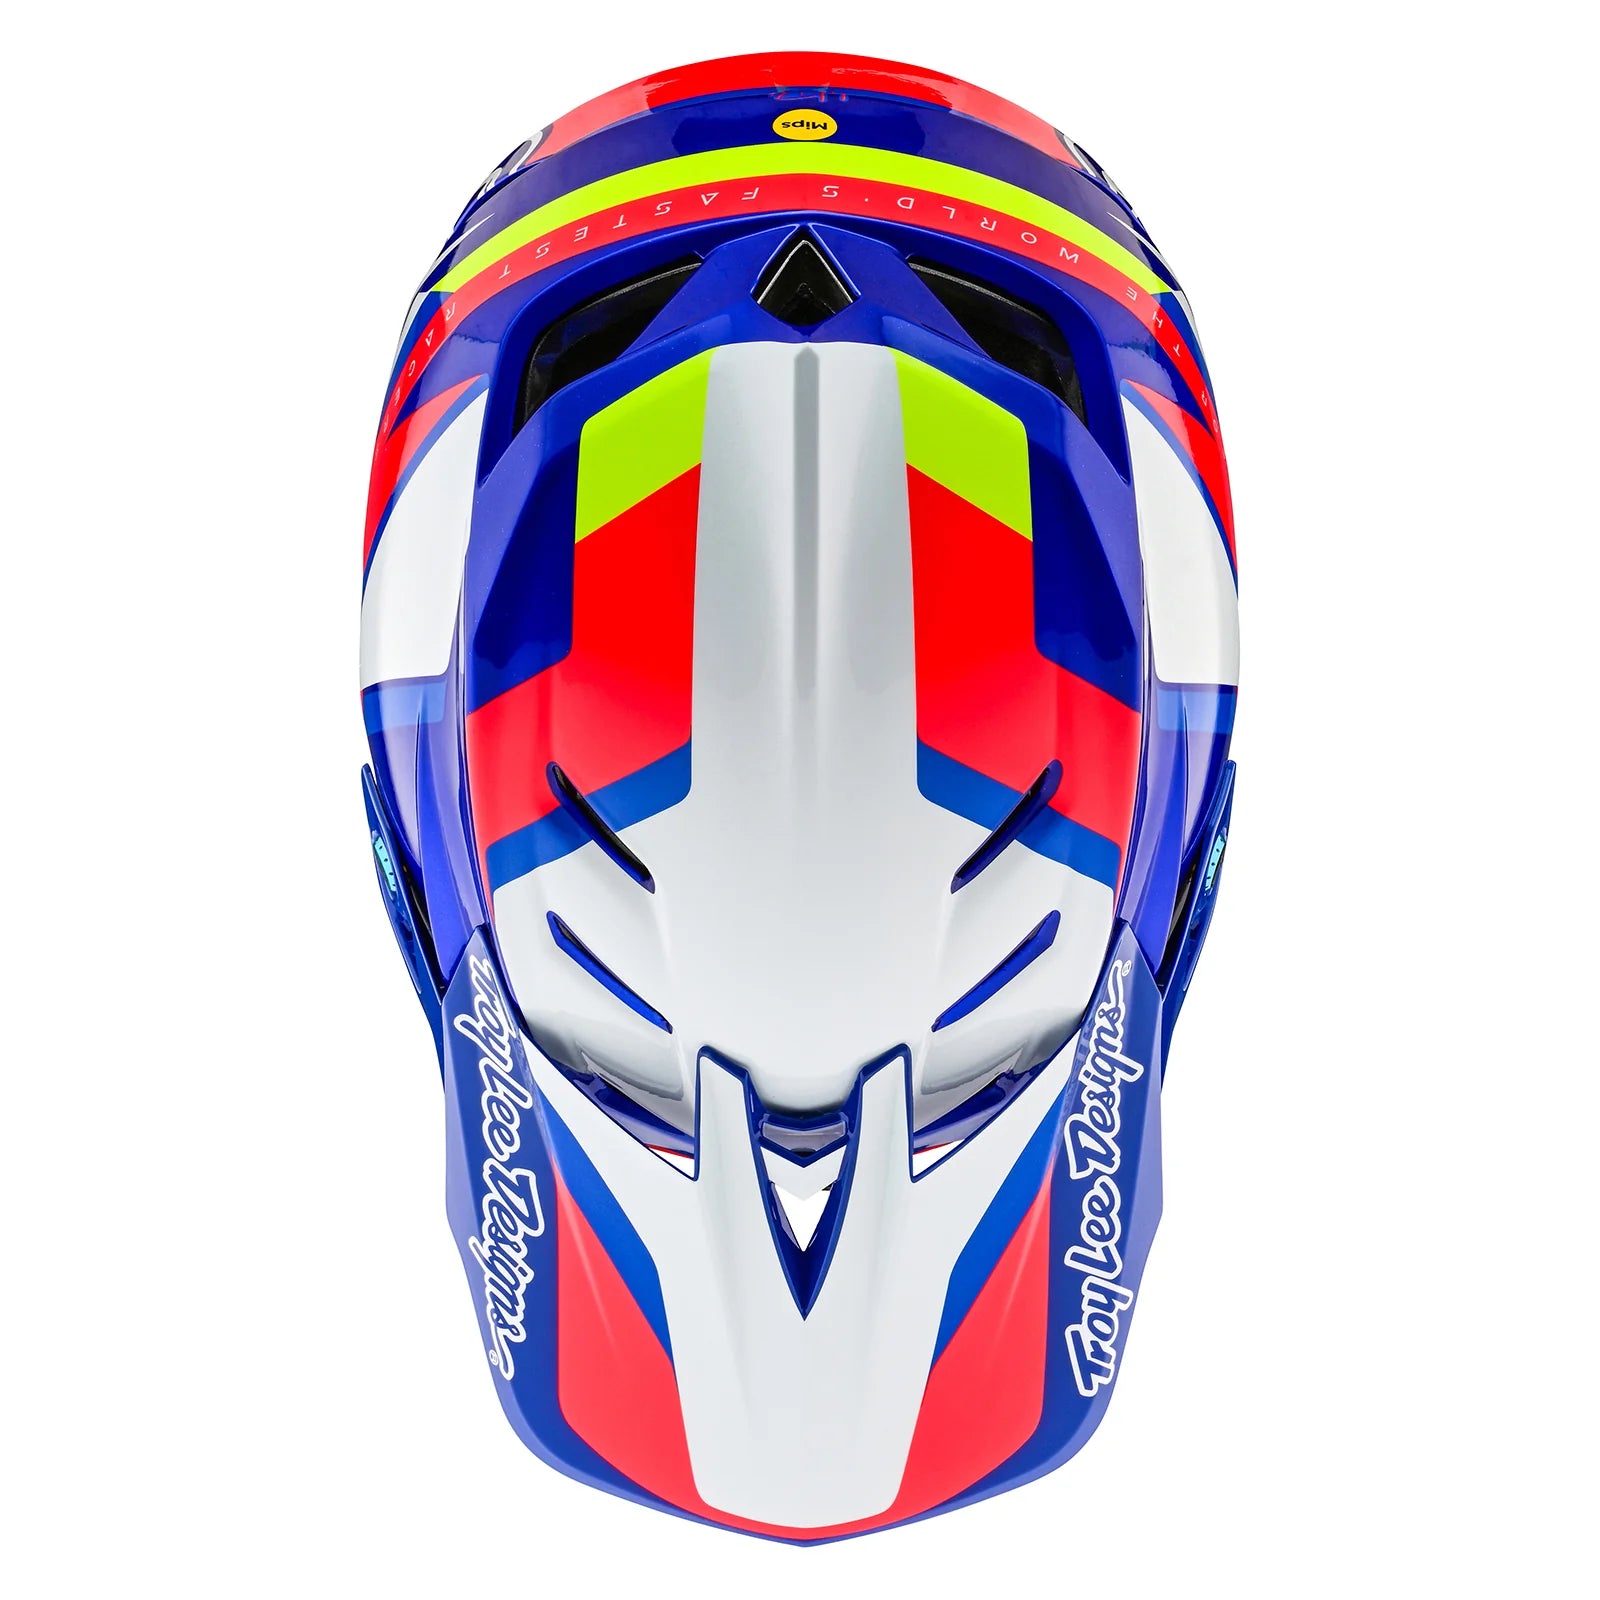 A TLD D4 AS Composite Helmet W/MIPS Omega Blue / White with a red, blue, and yellow design.